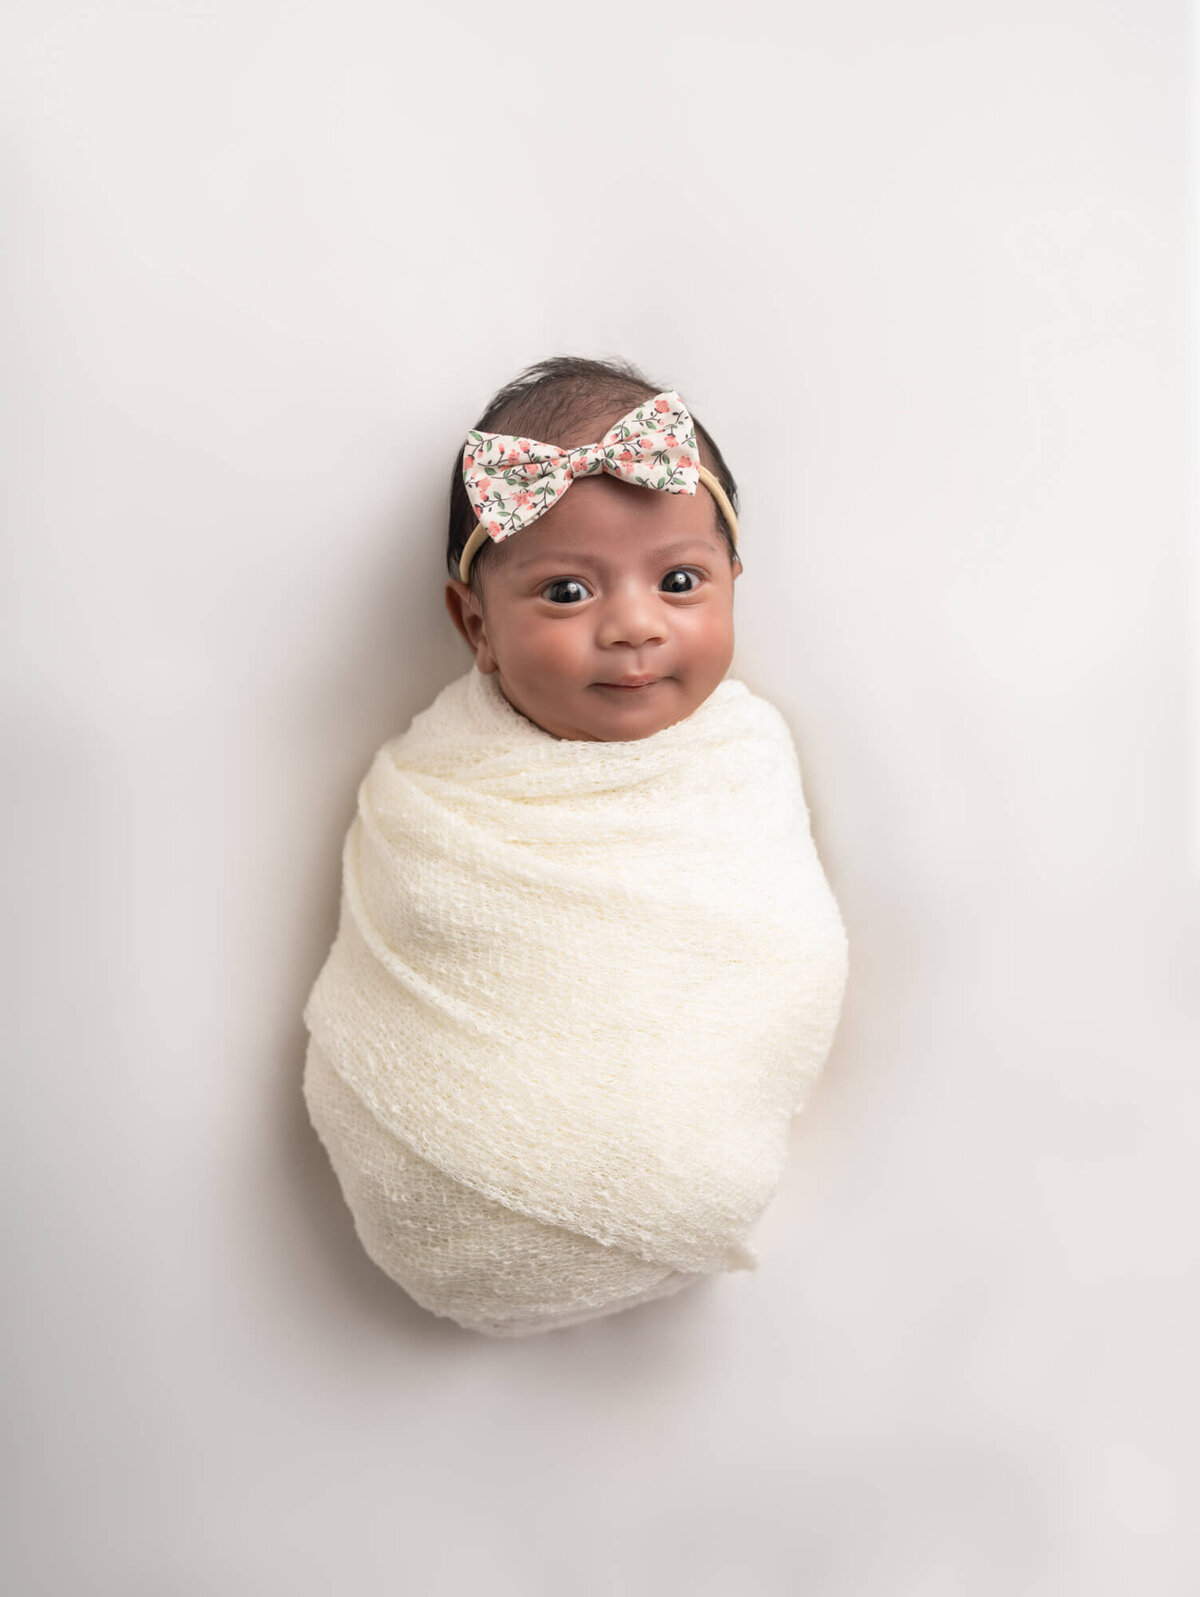 A newborn baby girl with a large floral bow and wrapped in a white blanket smiles with bright eyes